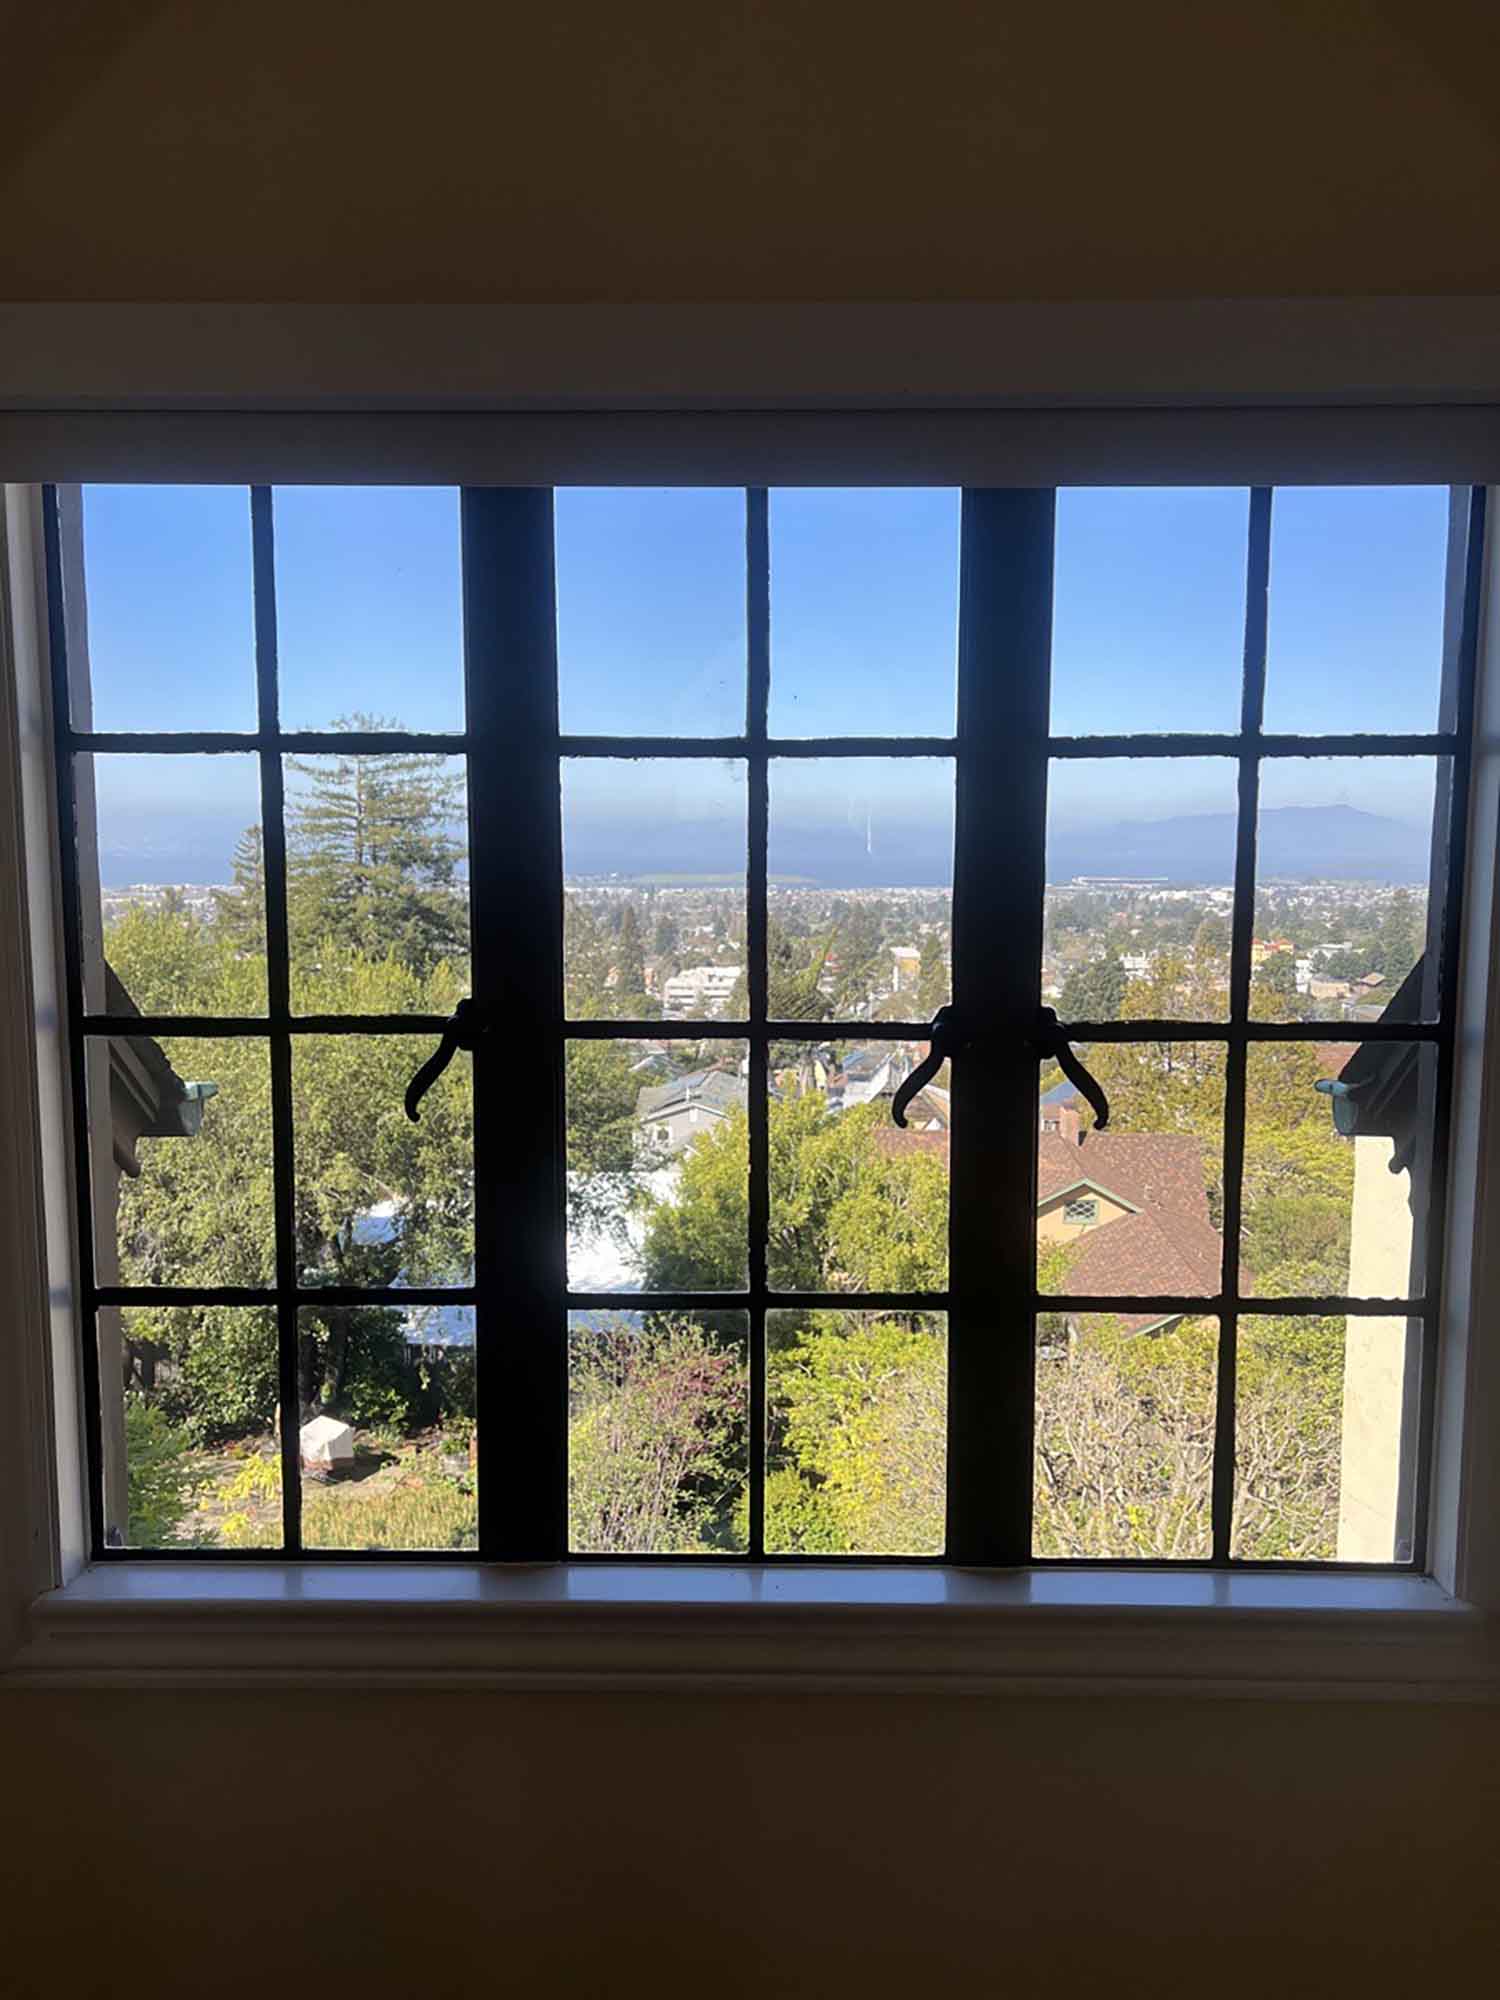 3M Sun Control Window Film for Berkeley, CA Homes, installed by ClimatePro.